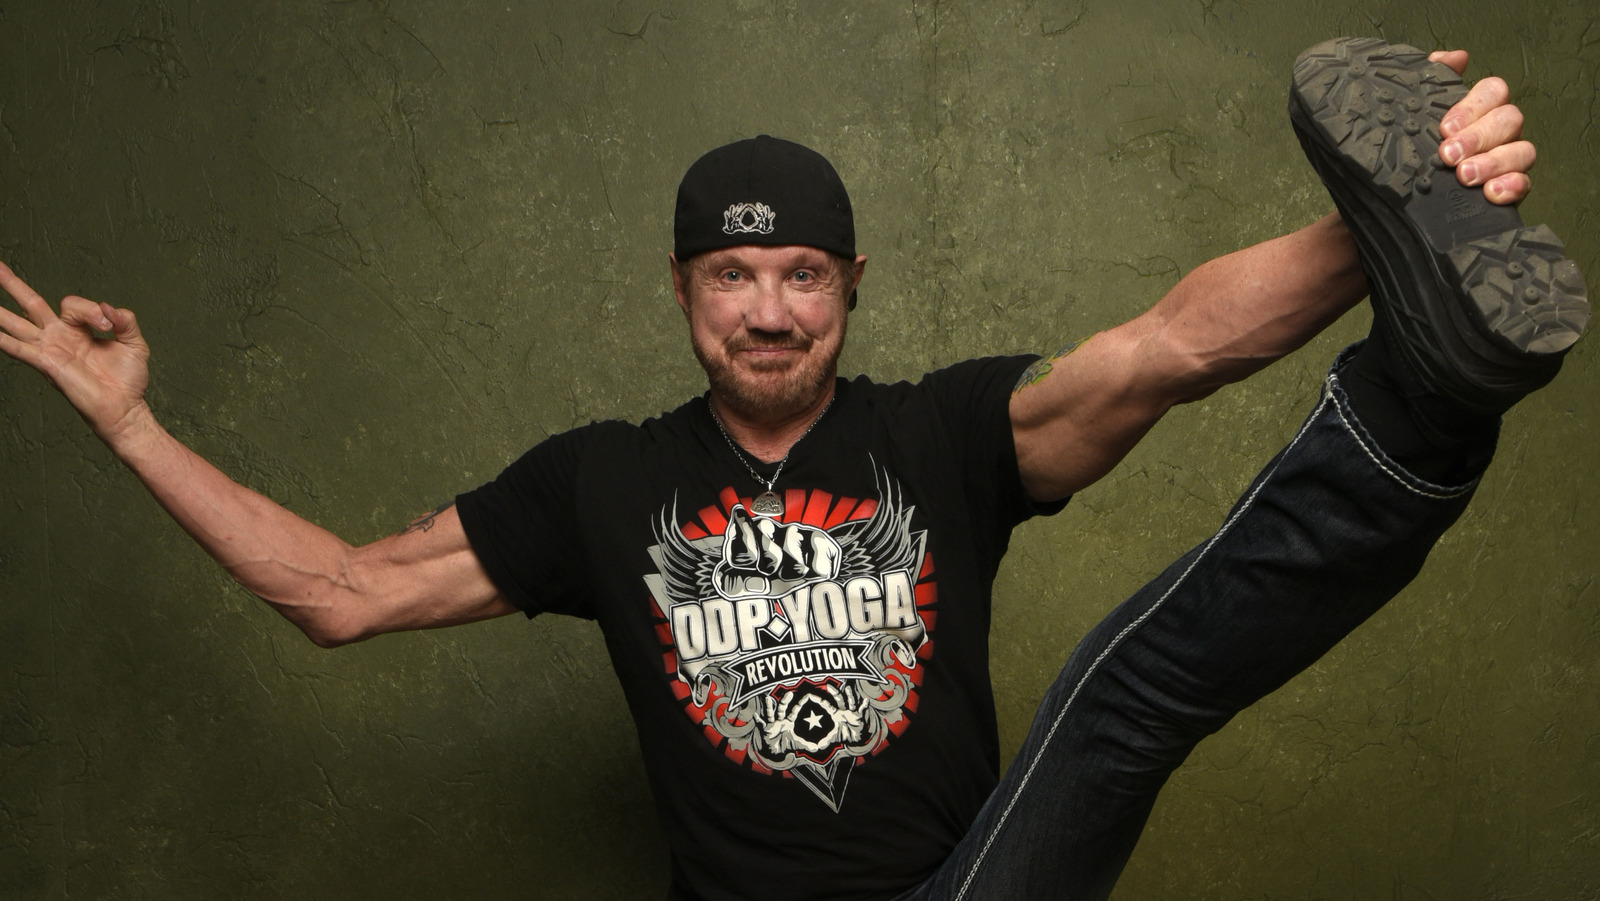 What Happened To DDP Yoga After Shark Tank? All About The Program